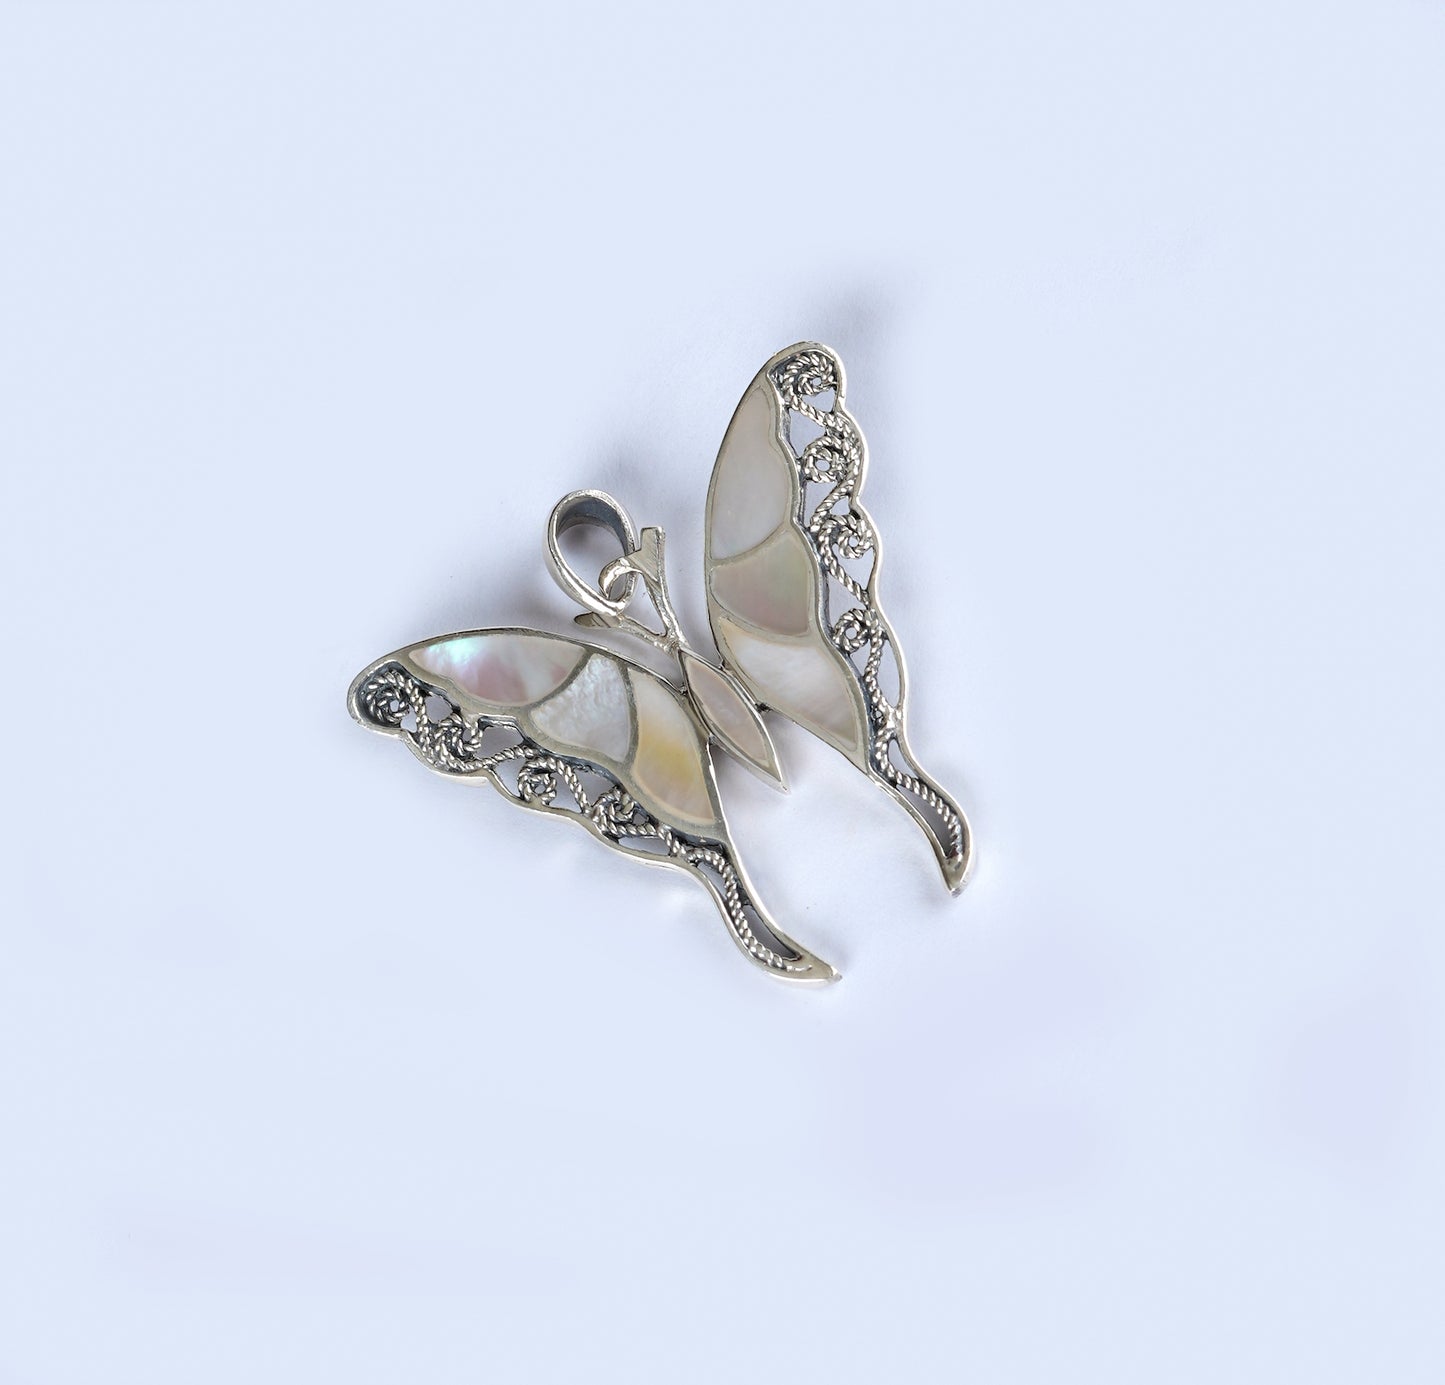 White Winged Butterfly  Silver Pendant